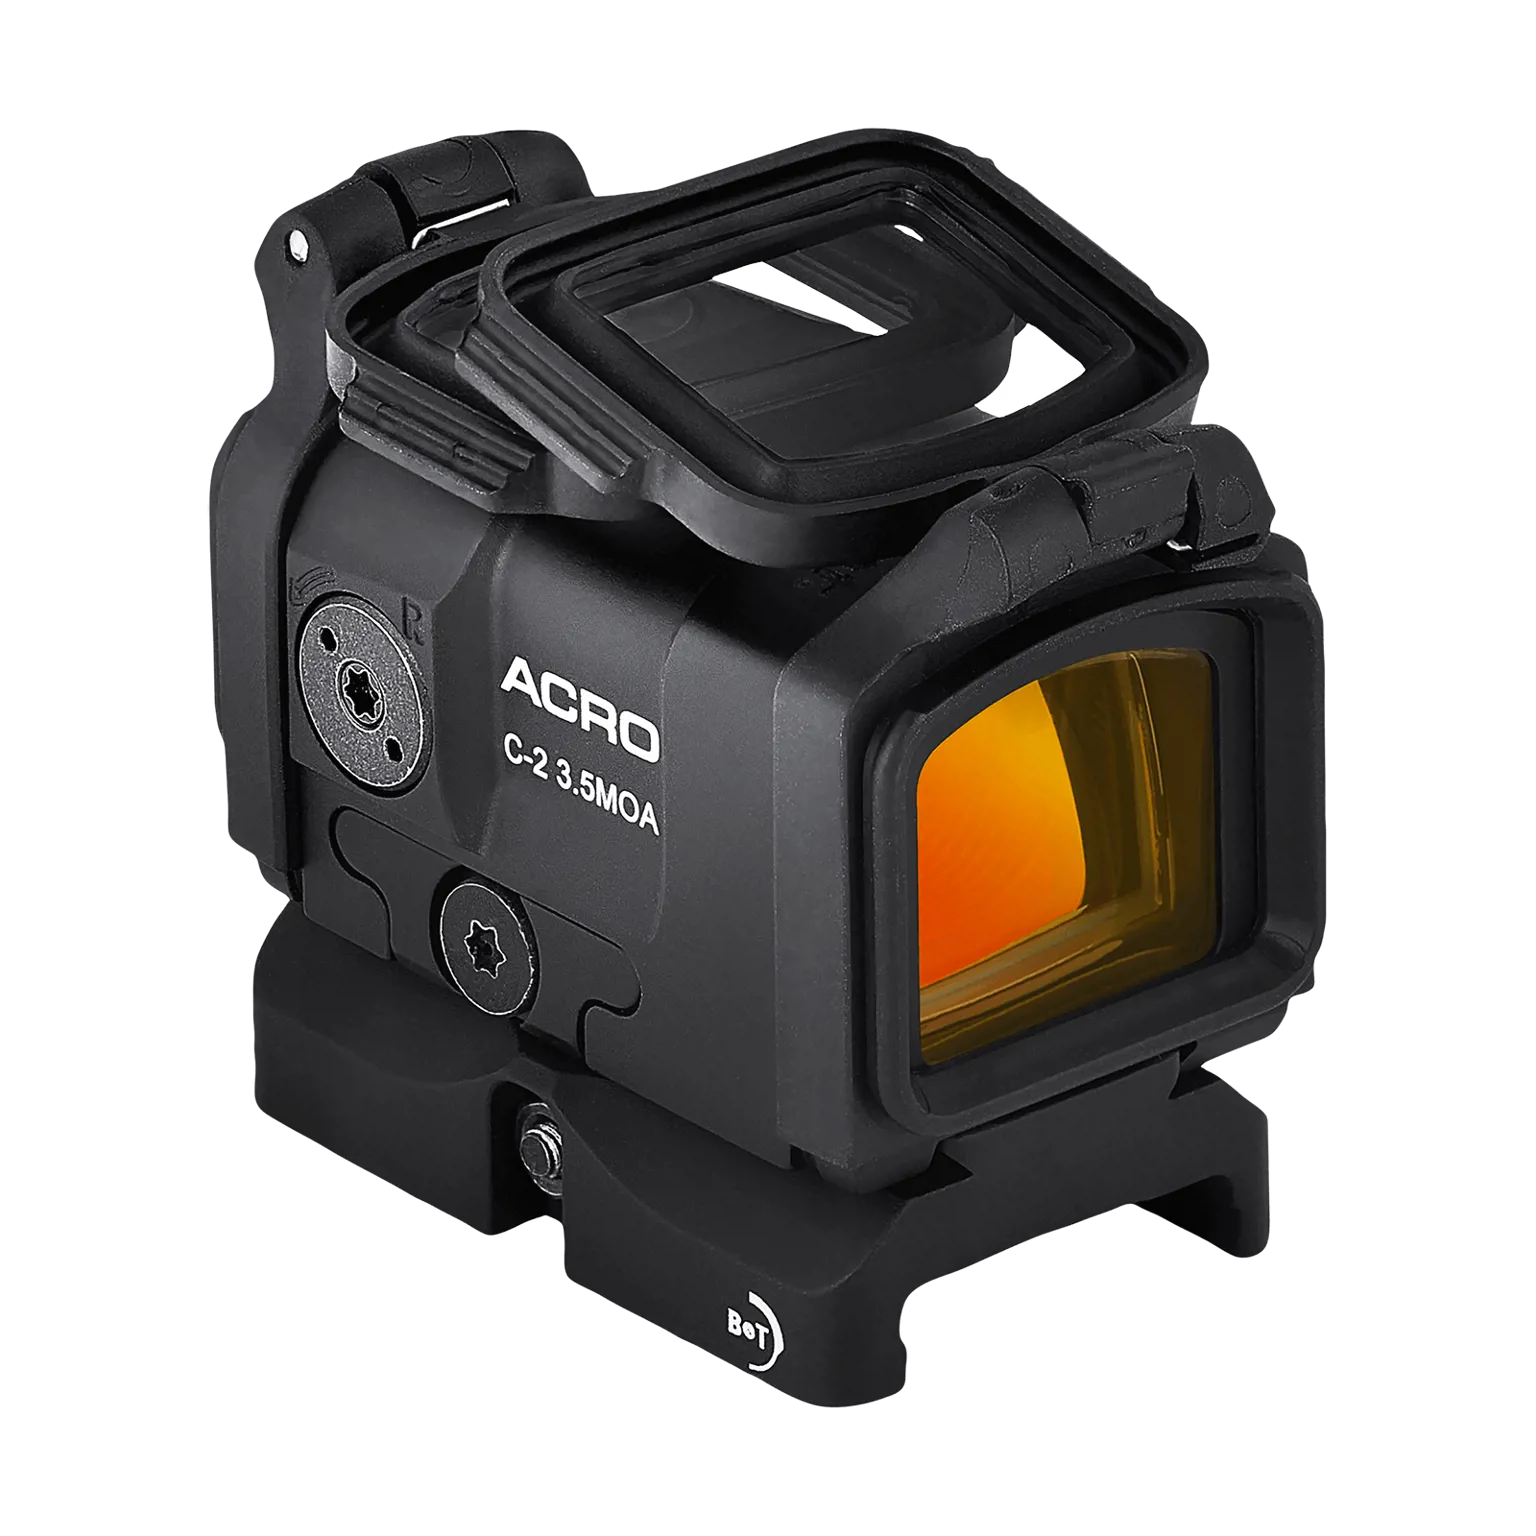 Acro C-2™ 3.5 MOA - Red dot reflex sight with fixed mount 22 mm - 5